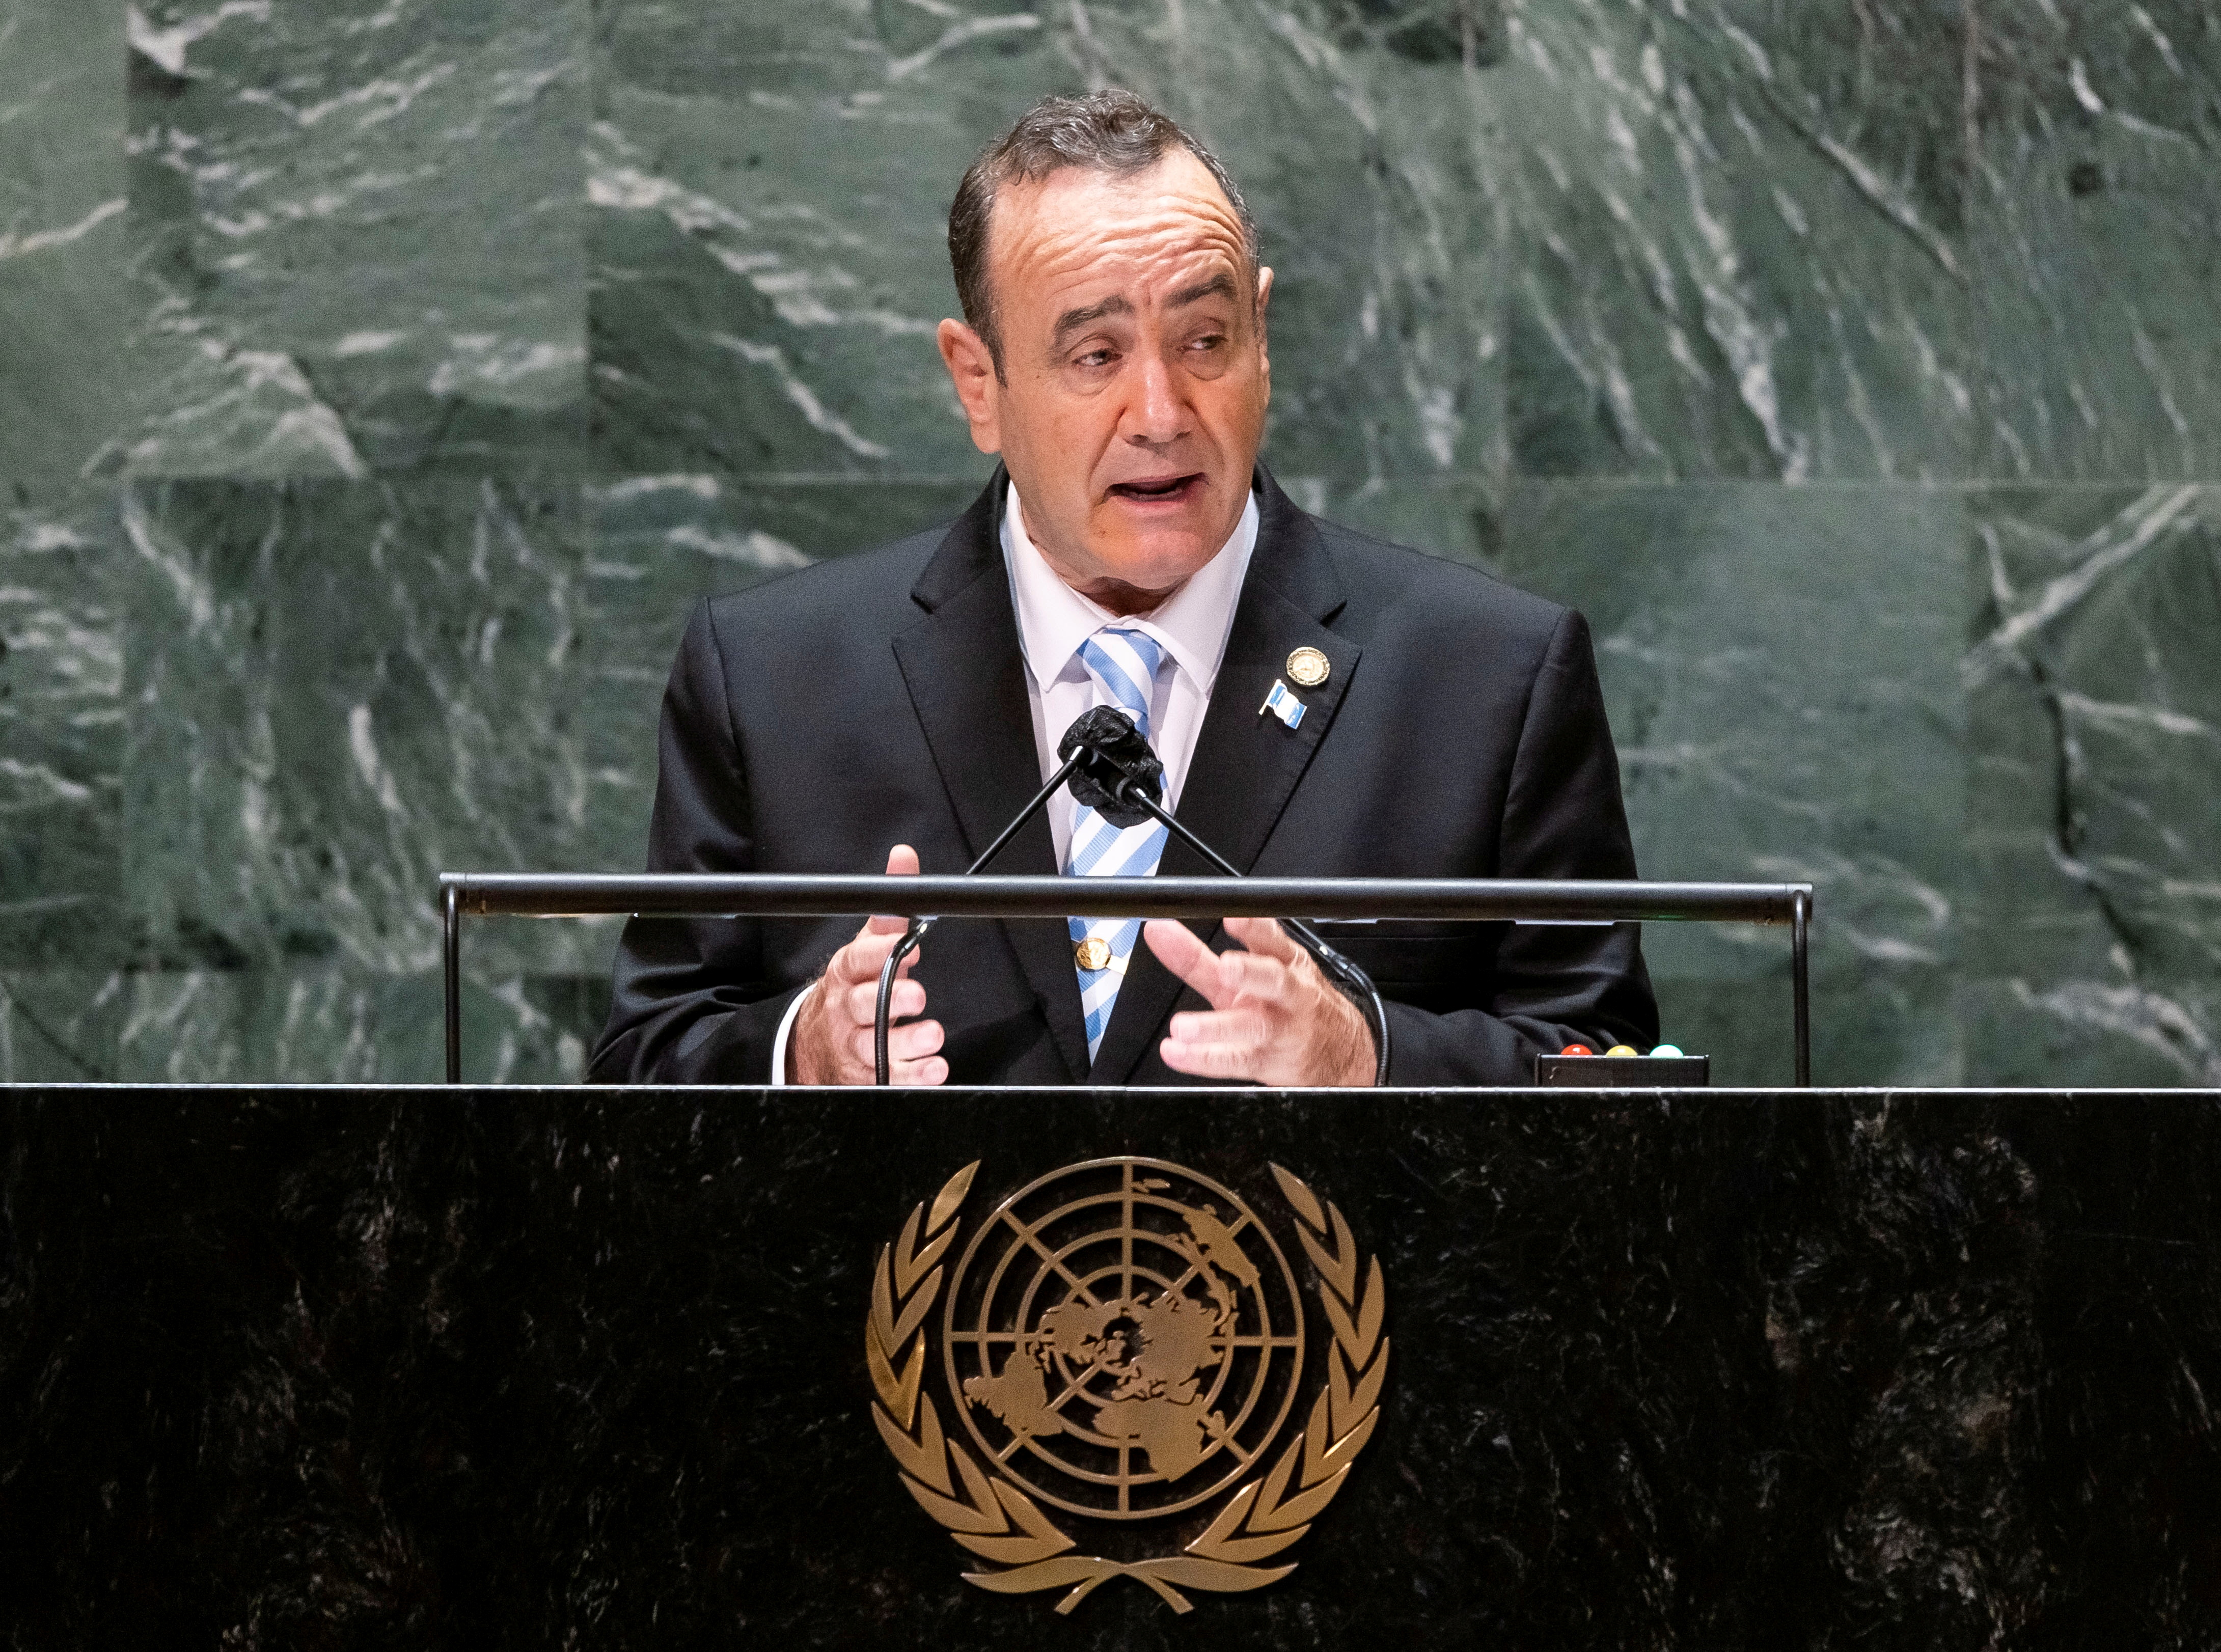 Guatemala's President Alejandro Giammattei addresses the General Debate of the 76th Session of the United Nations General Assembly in New York City, U.S., September 22, 2021. Justin Lane/Pool via REUTERS/File Photo